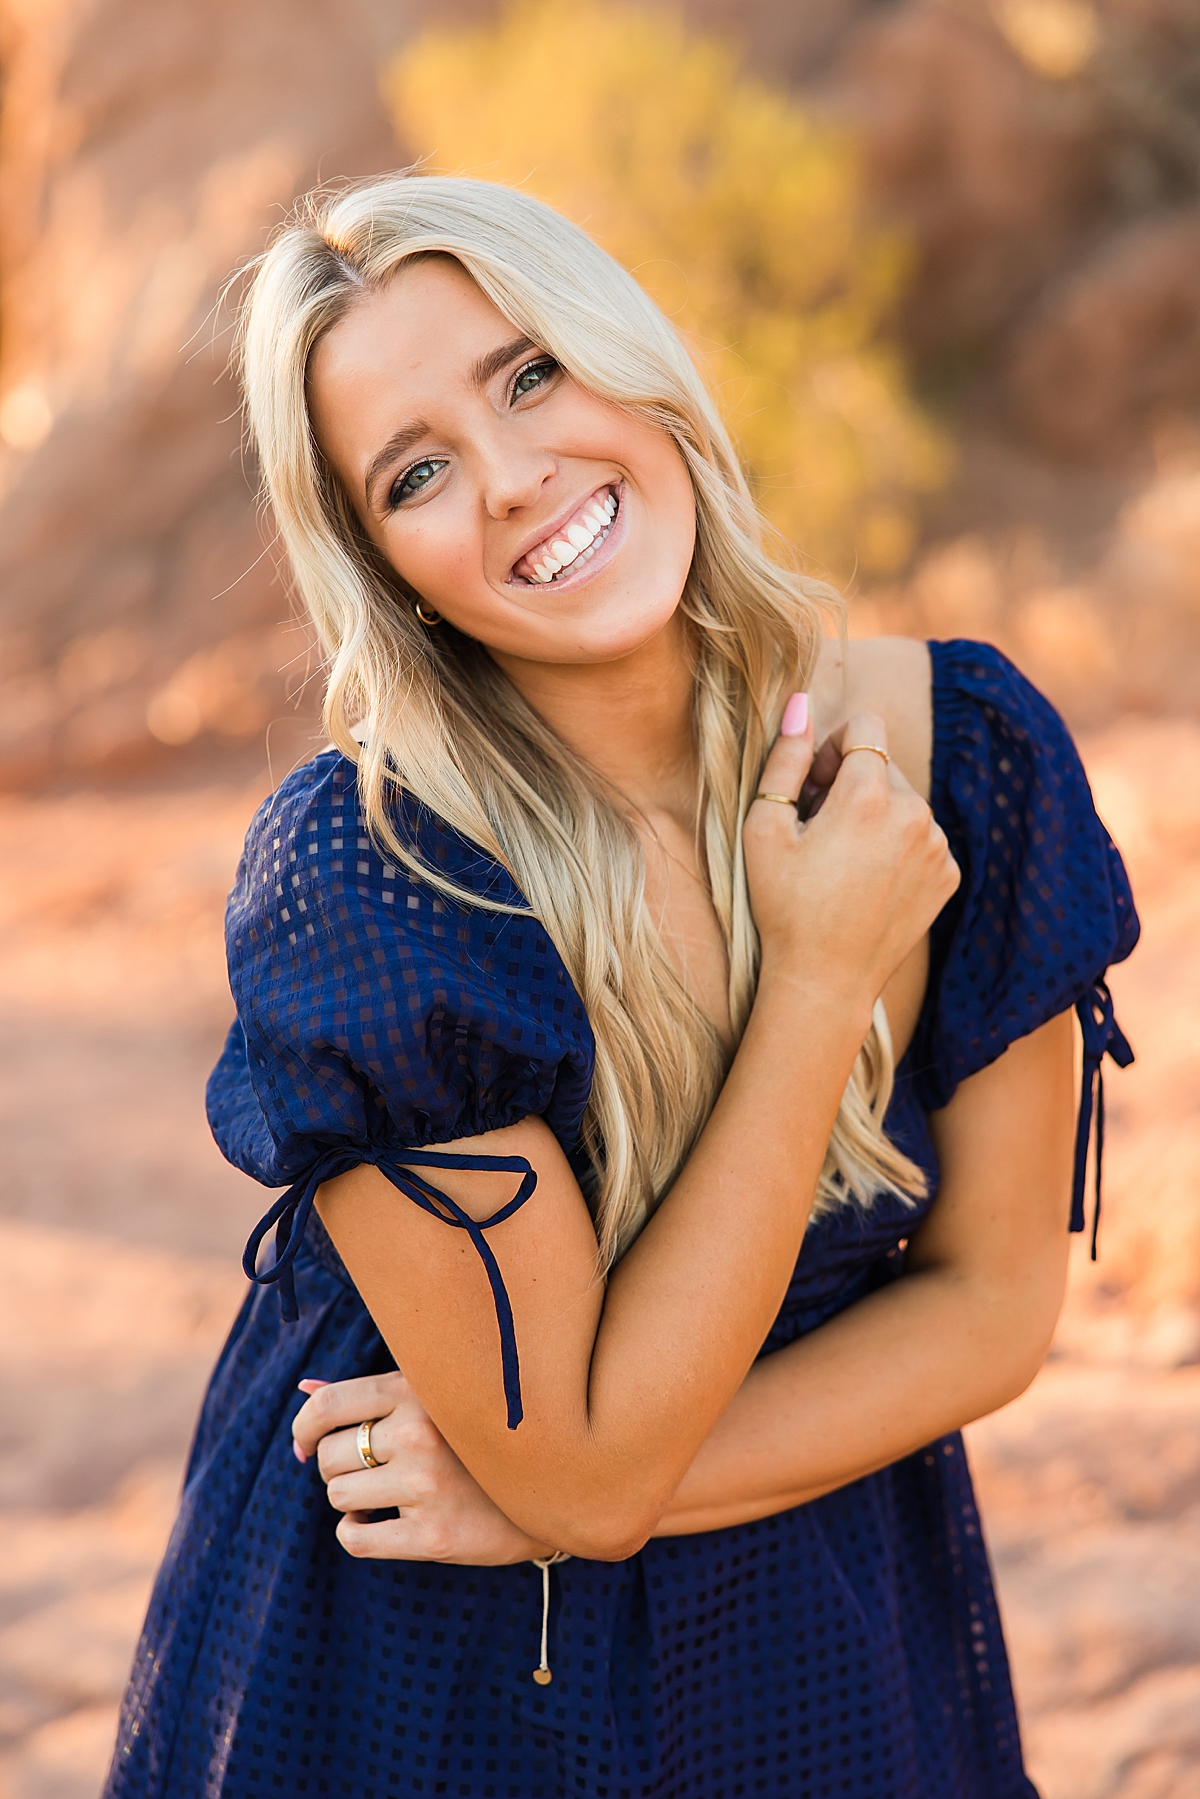 Leah Hope Photography | Scottsdale Arizona Senior Photographer | Phoenix Arizona High School Senior Pictures | Natural Light Photography | What to Wear | Senior Girl Poses and Posing Ideas | Senior Photo Shoot Outfit Inspiration | Outfits and Styling Fashion Ideas | Cactus Desert Scenery | Golden Hour Sunset Light | Papago Park Red Rock | Urban Casual Senior Photos